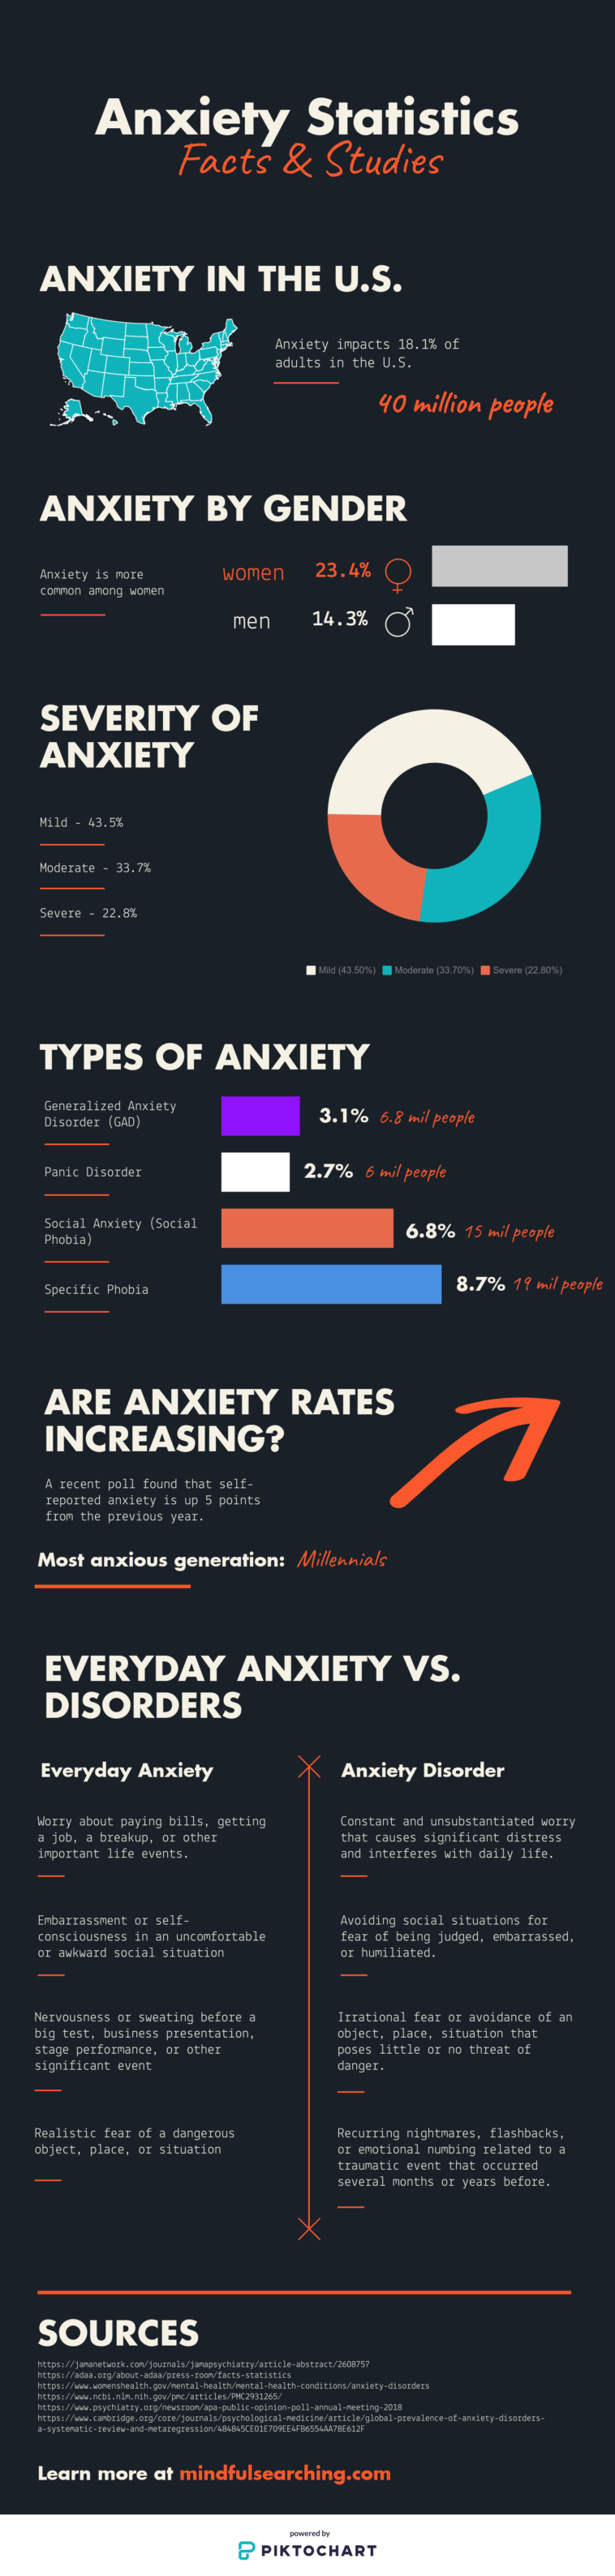 Infographic Anxiety Statistics U S And Worldwide Infographic Tv